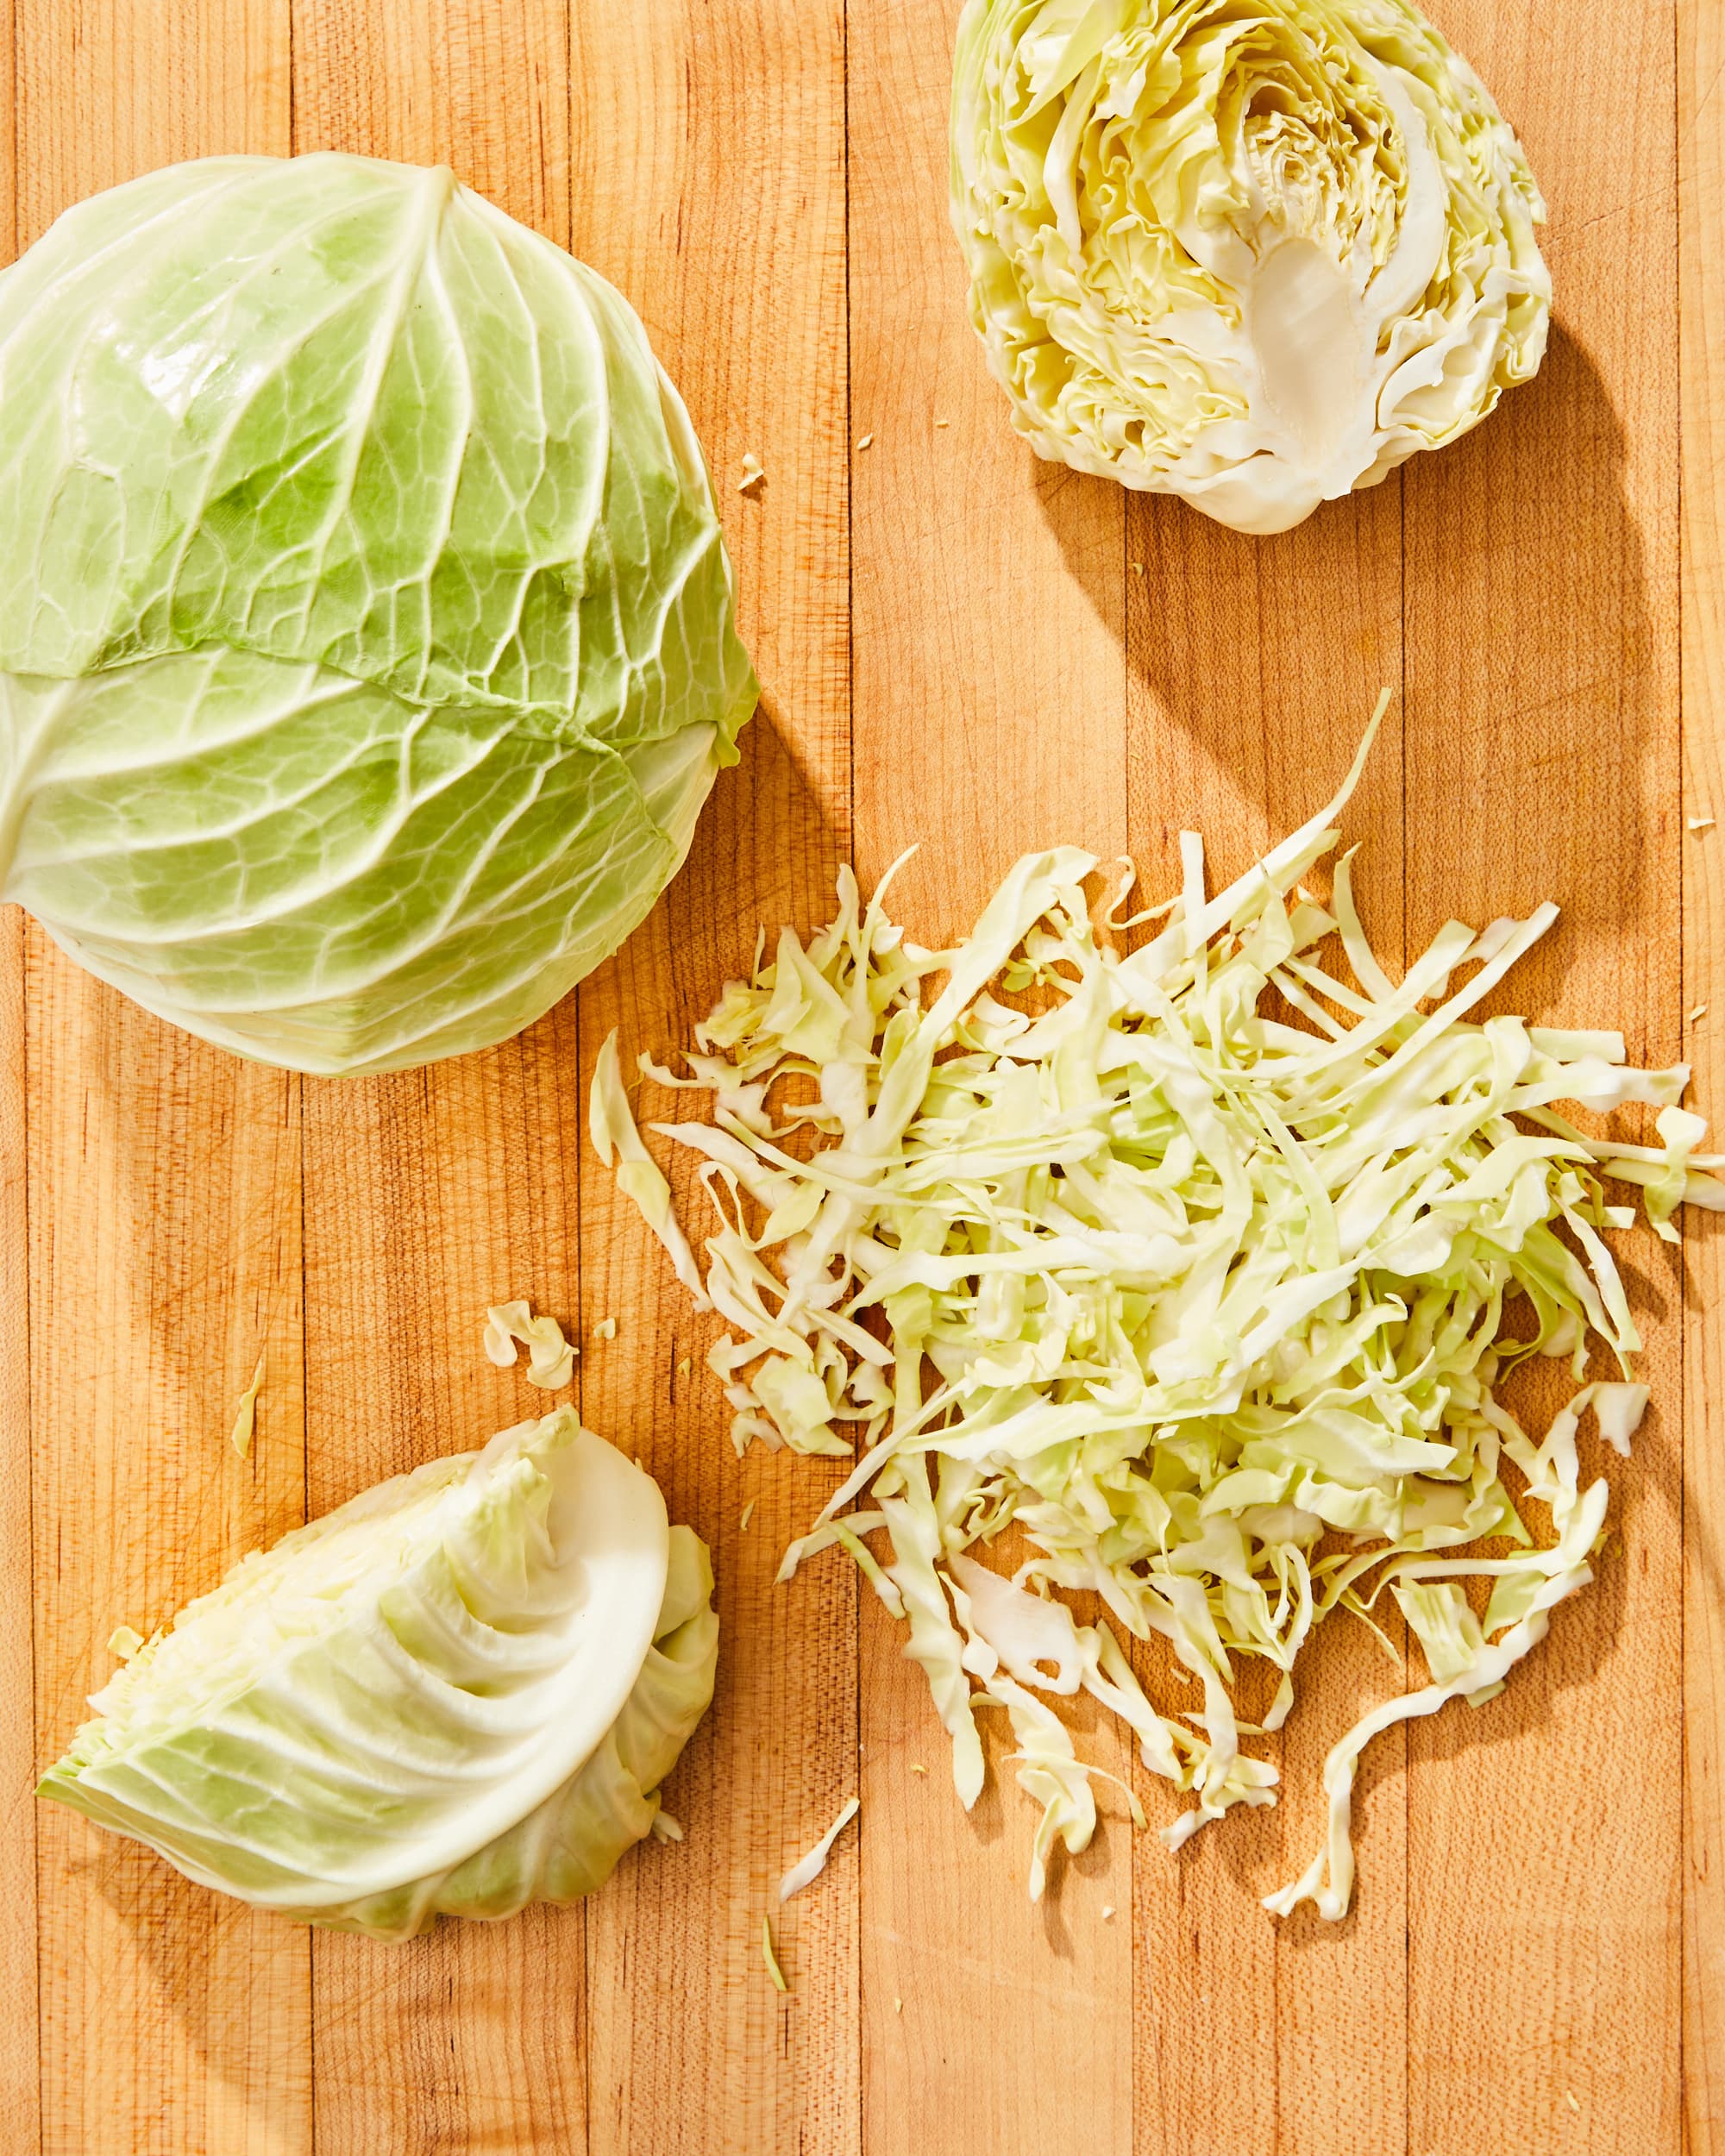 https://cdn.apartmenttherapy.info/image/upload/v1671732542/k/Photo/Tips/2023-02-How-to-Cut-Cabbage/How-to-cut-cabbage-295.jpg